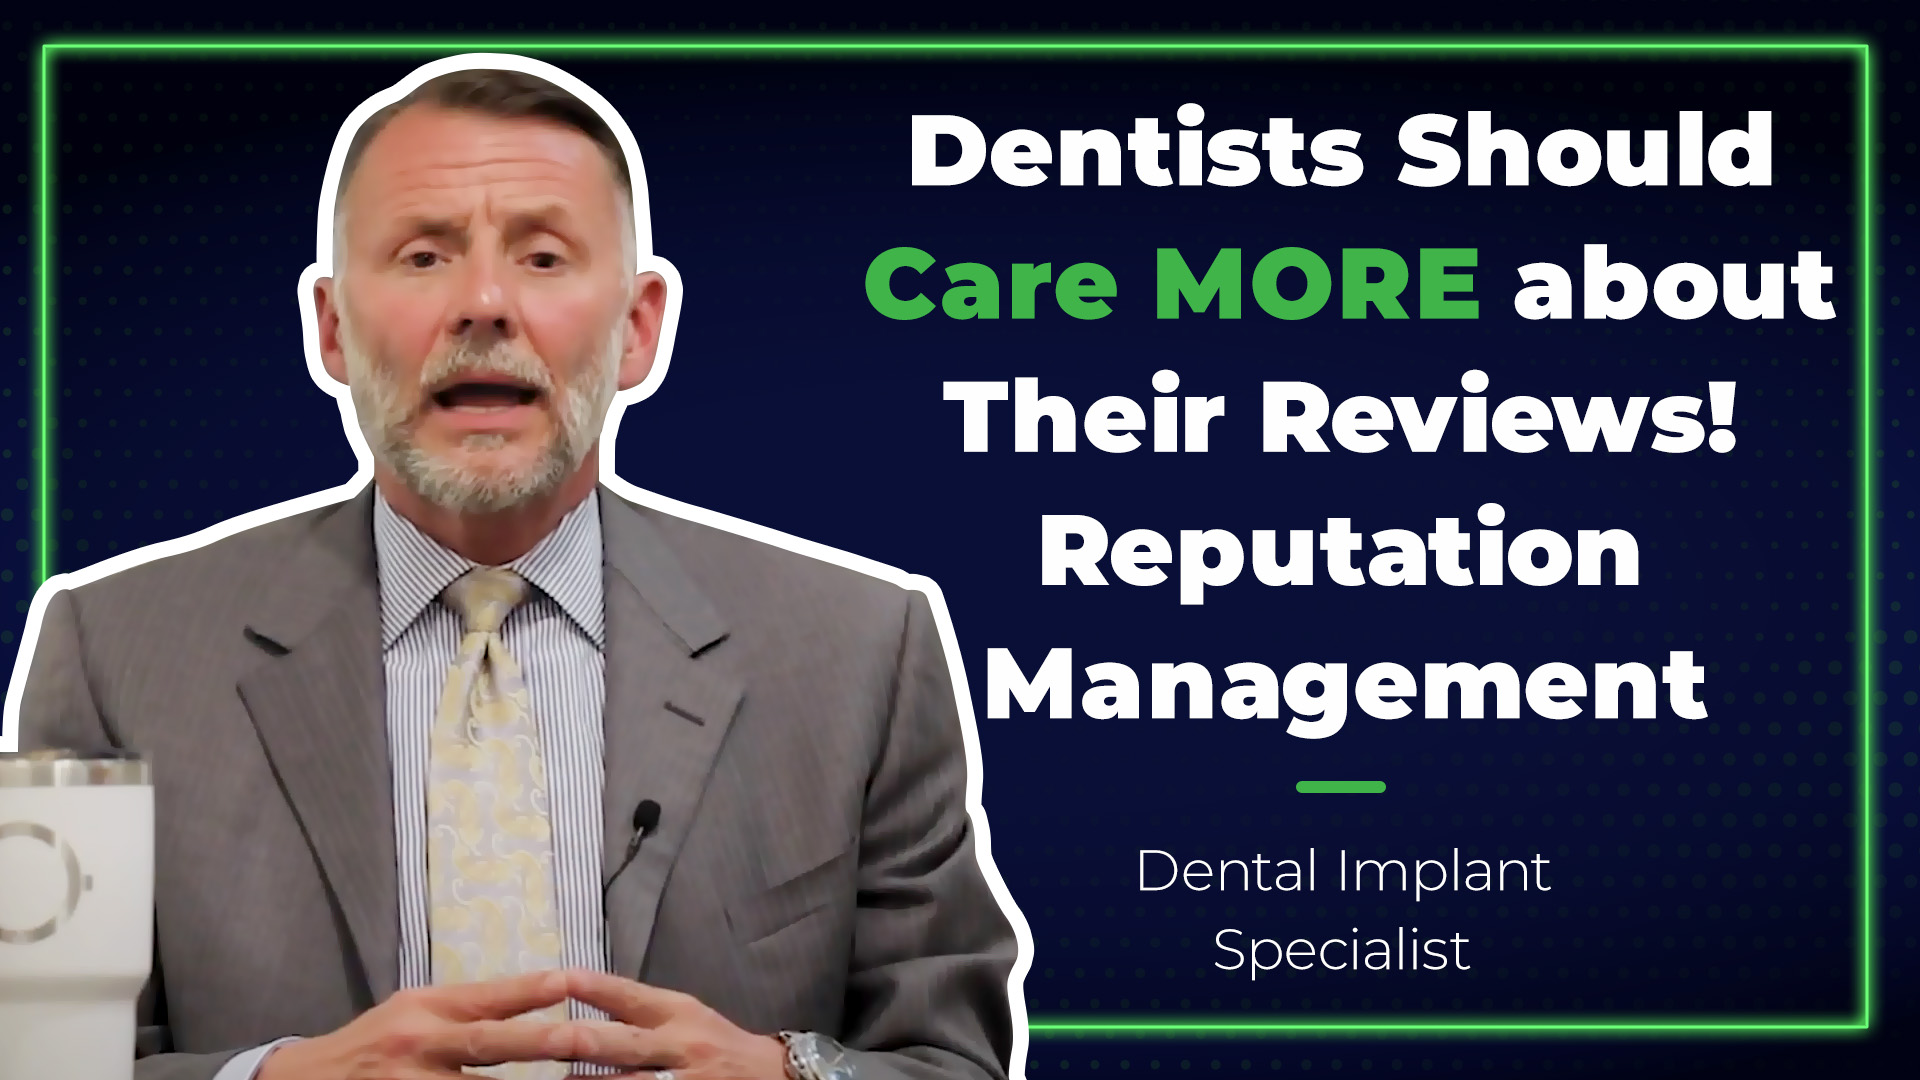 Tools to grow your practice | Dentists Should Care MORE About their Reviews Reputation Management Dental Implant Specialist